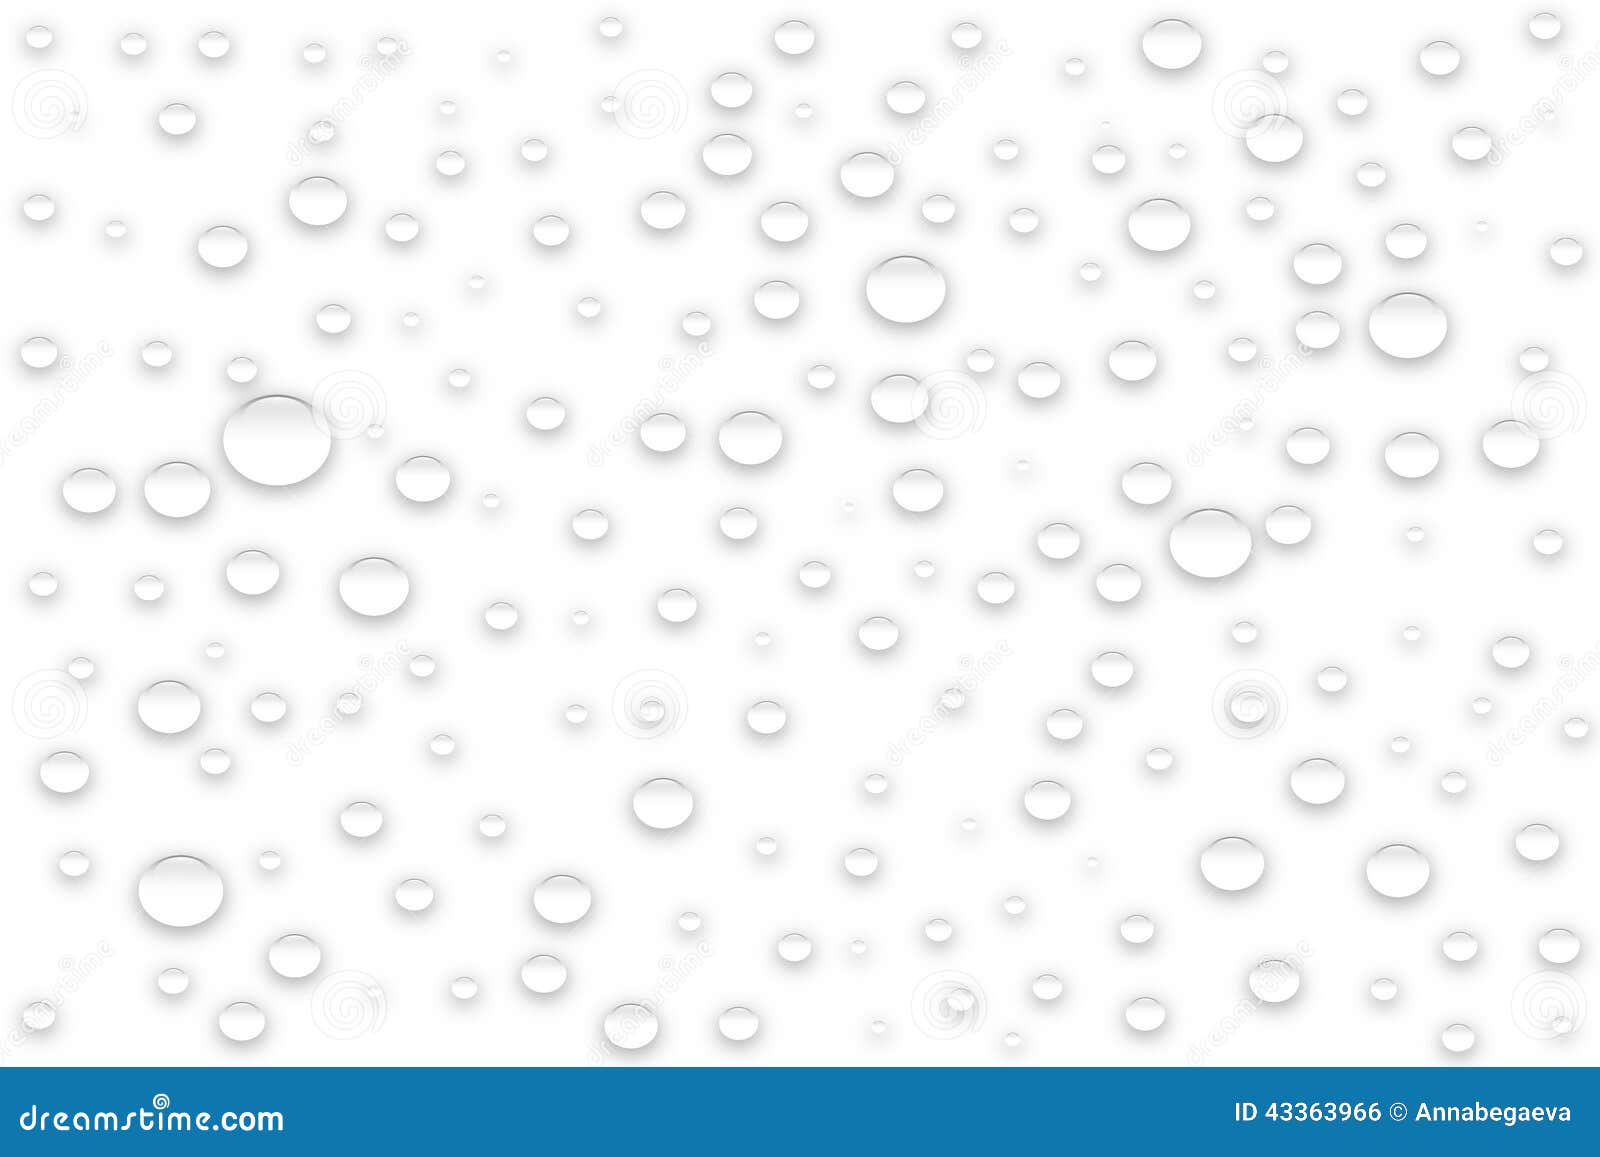 Water Drops On White Background Stock Vector - Image: 43363966